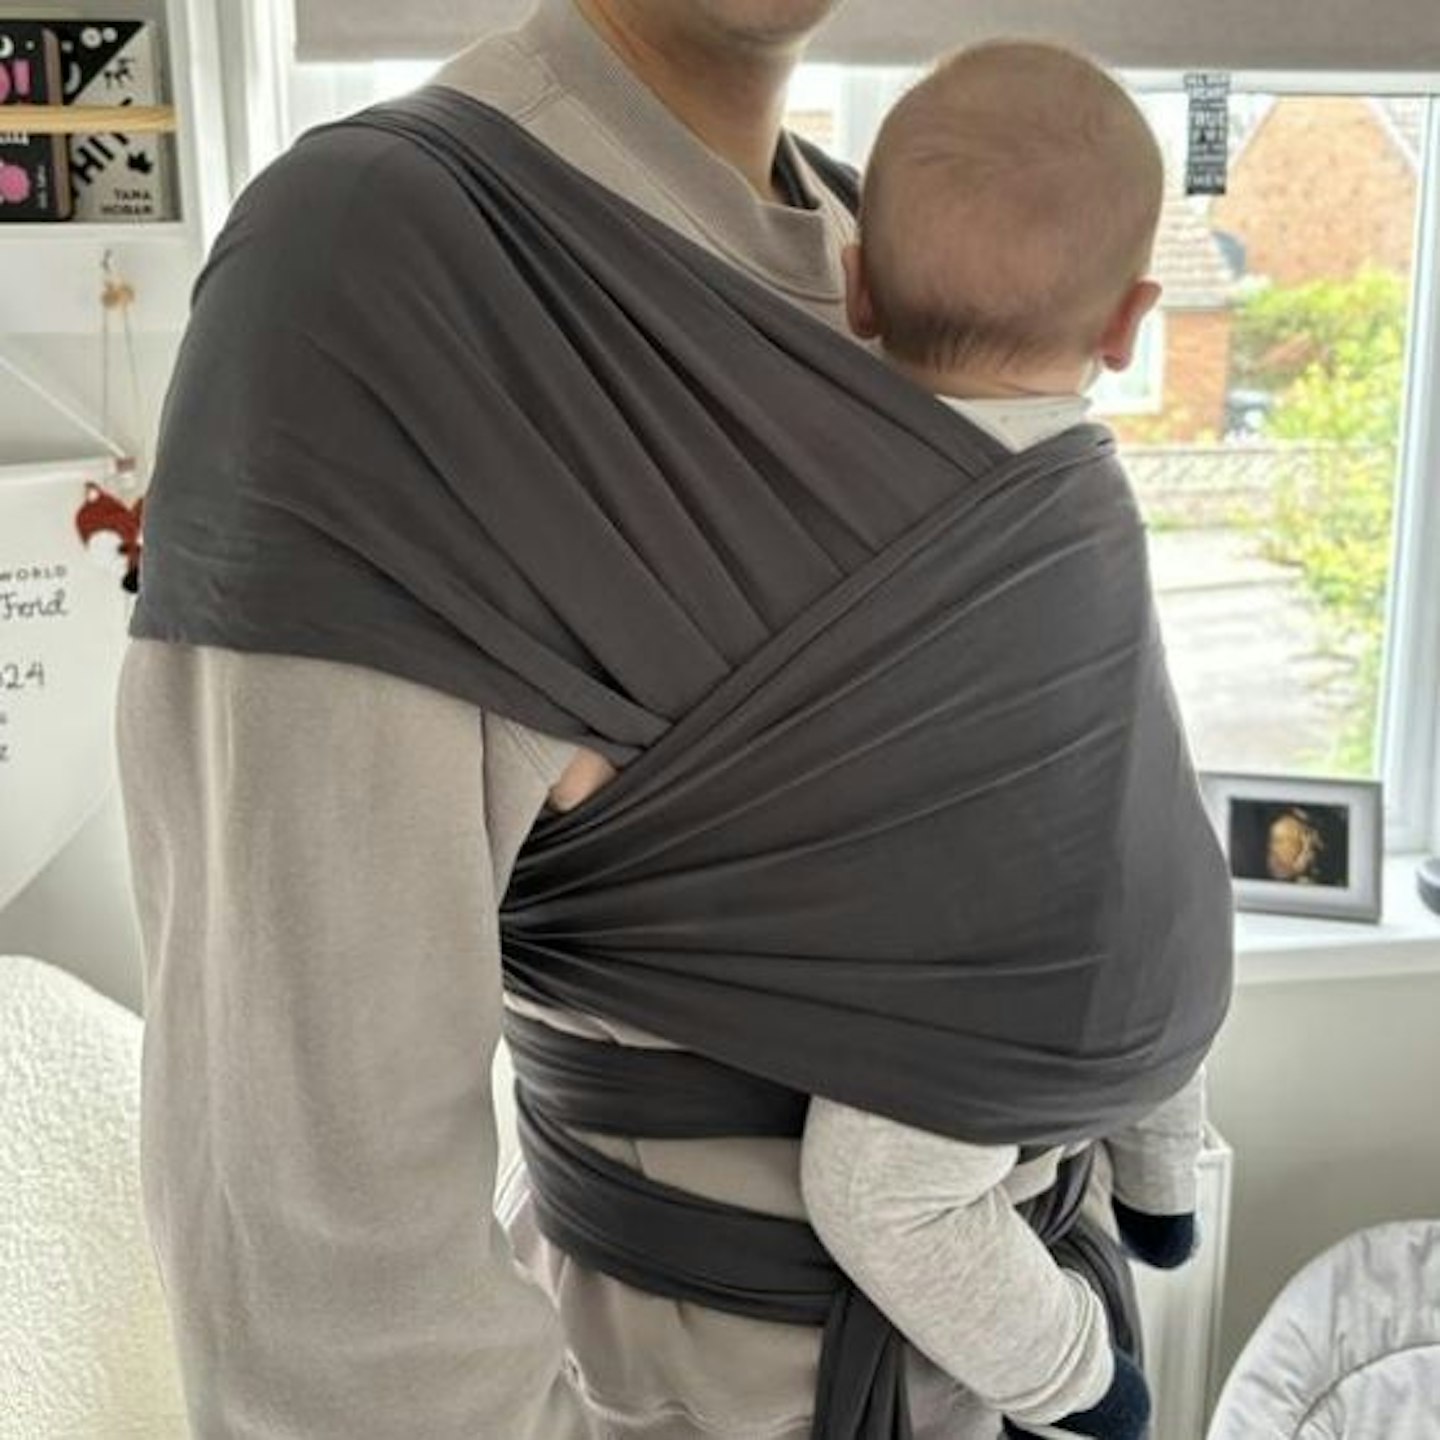 Baby being carried in the Ergobaby Aura Wrap